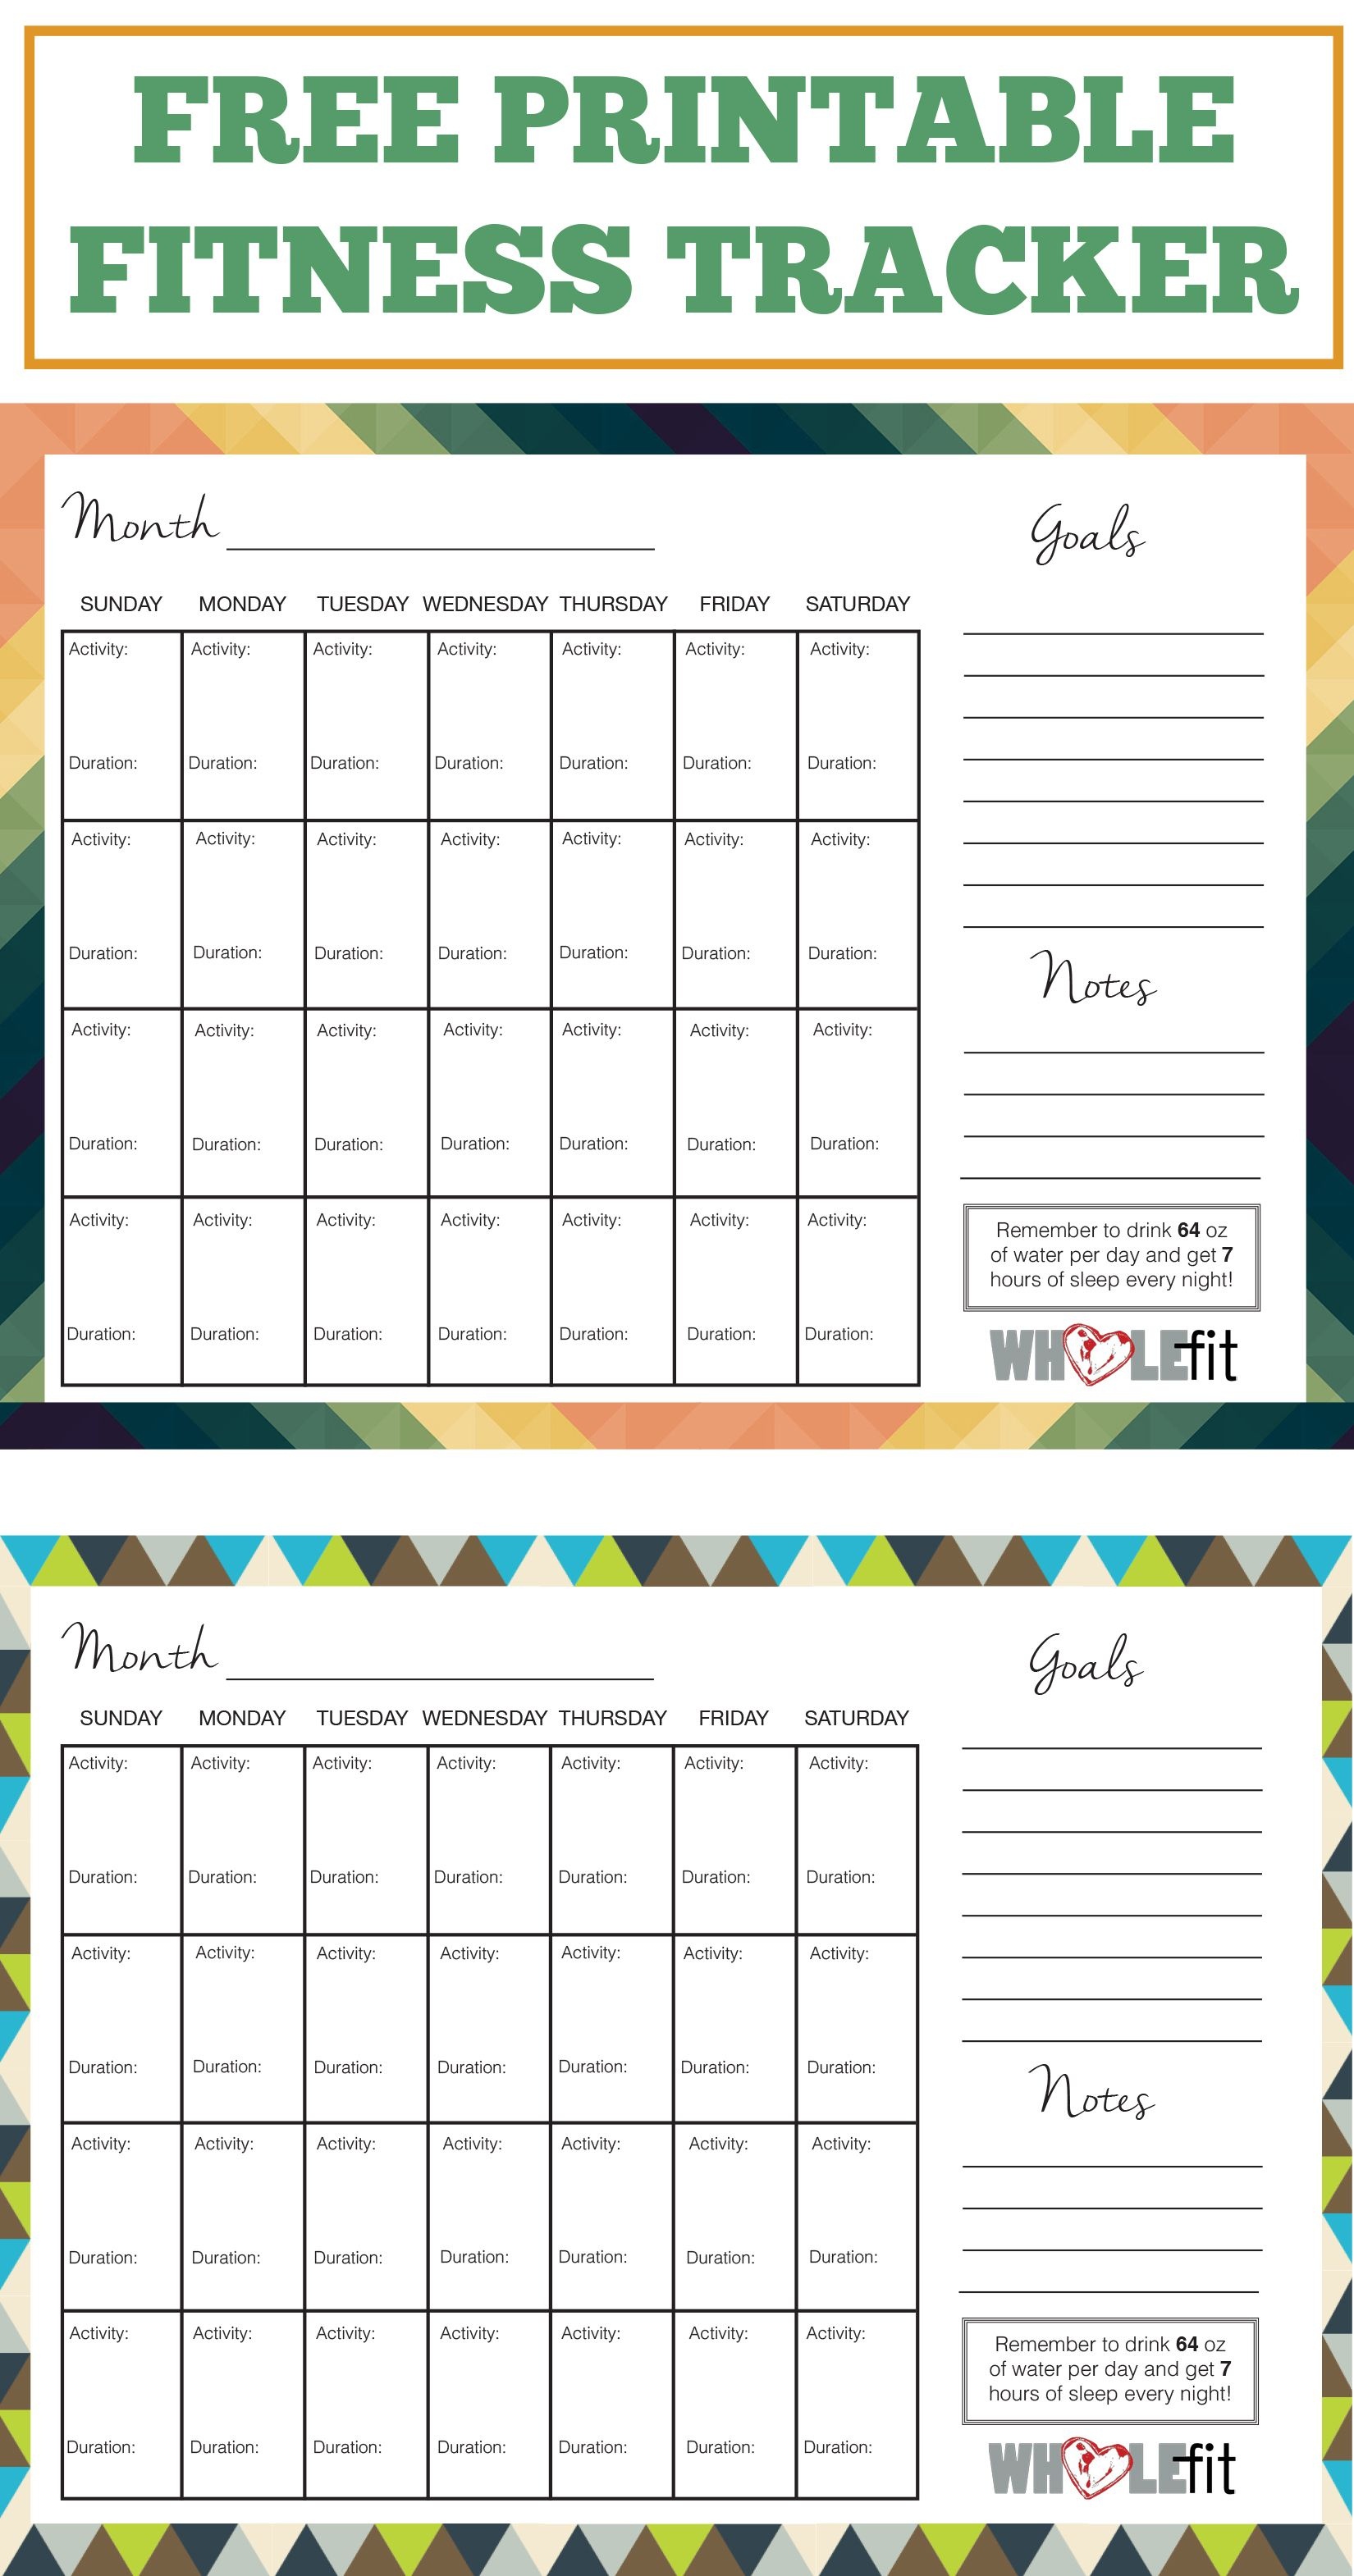 Track Your Progress With These Free Printable Fitness Trackers! | My - Free Printable Fitness Tracker